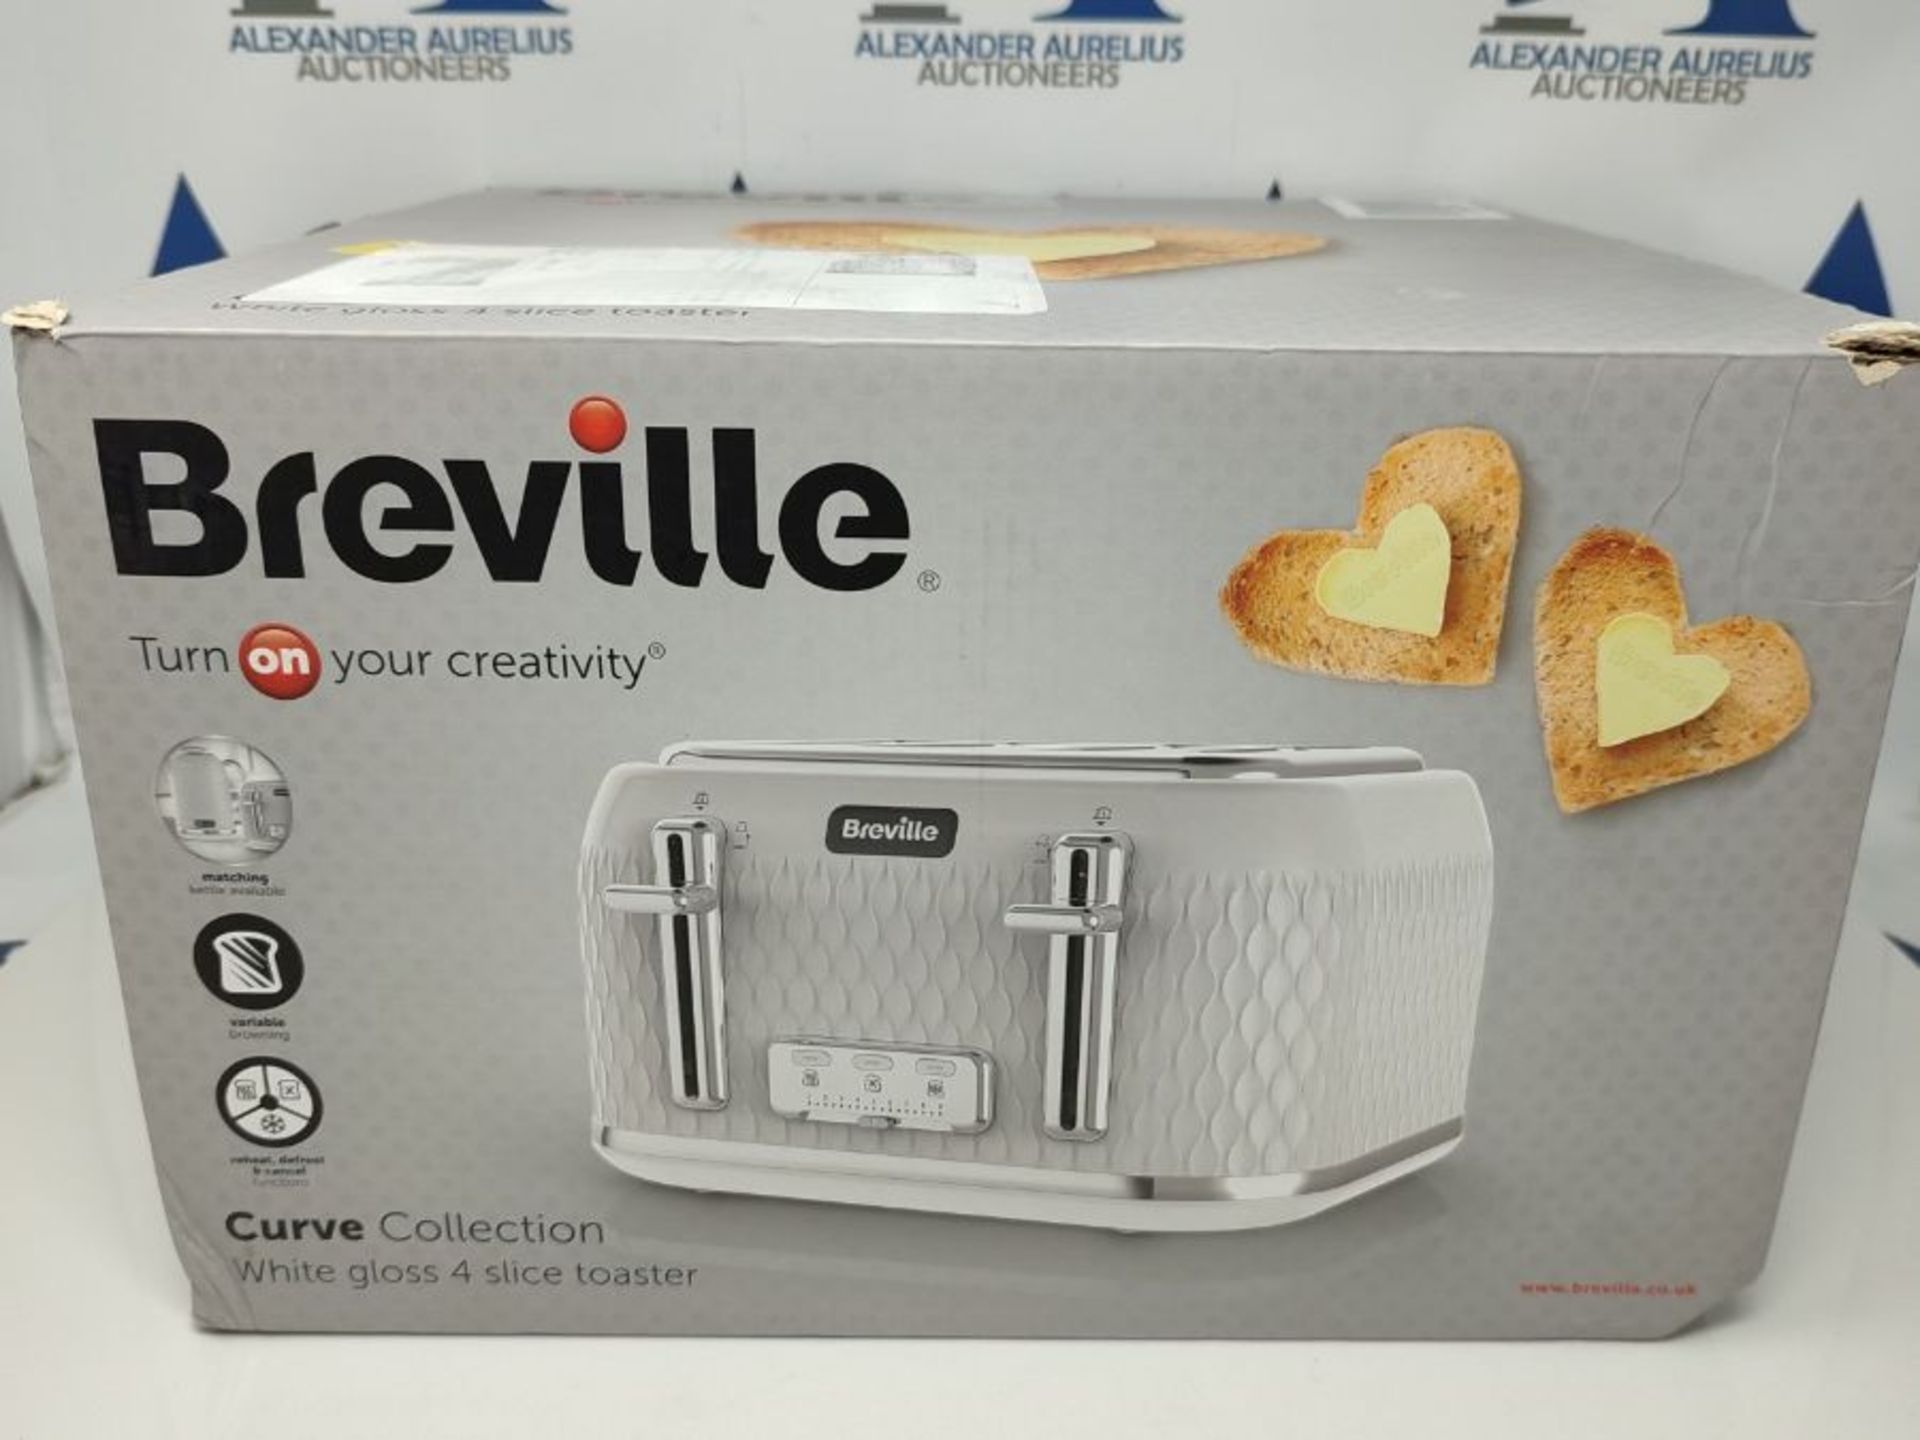 Breville Curve 4-Slice Toaster with High Lift and Wide Slots | White & Chrome [VTT911] - Image 2 of 3